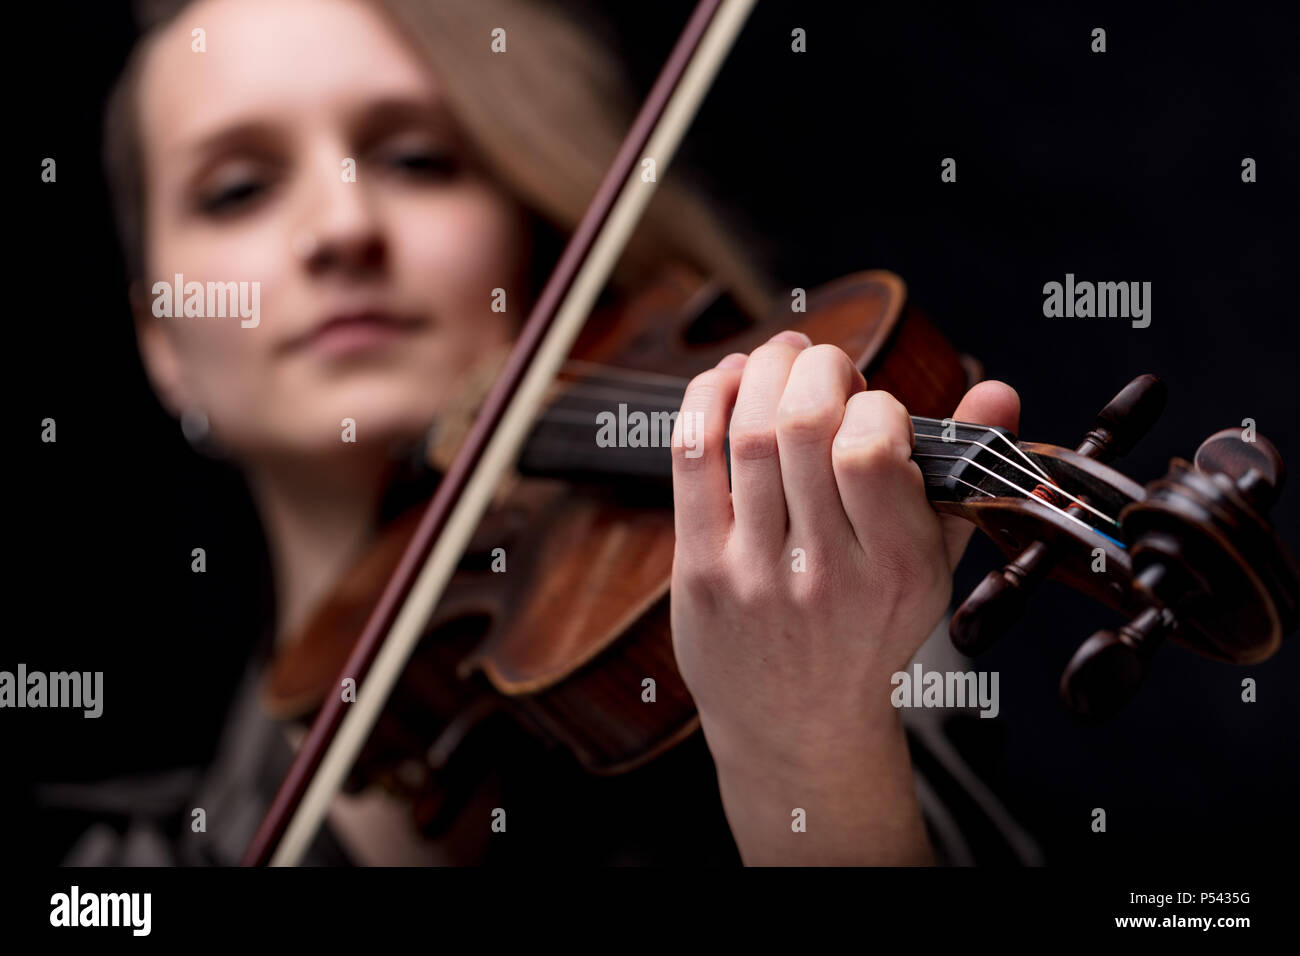 focus on the hand of a baroque violinist player on a black background, she's very serios and determined Stock Photo